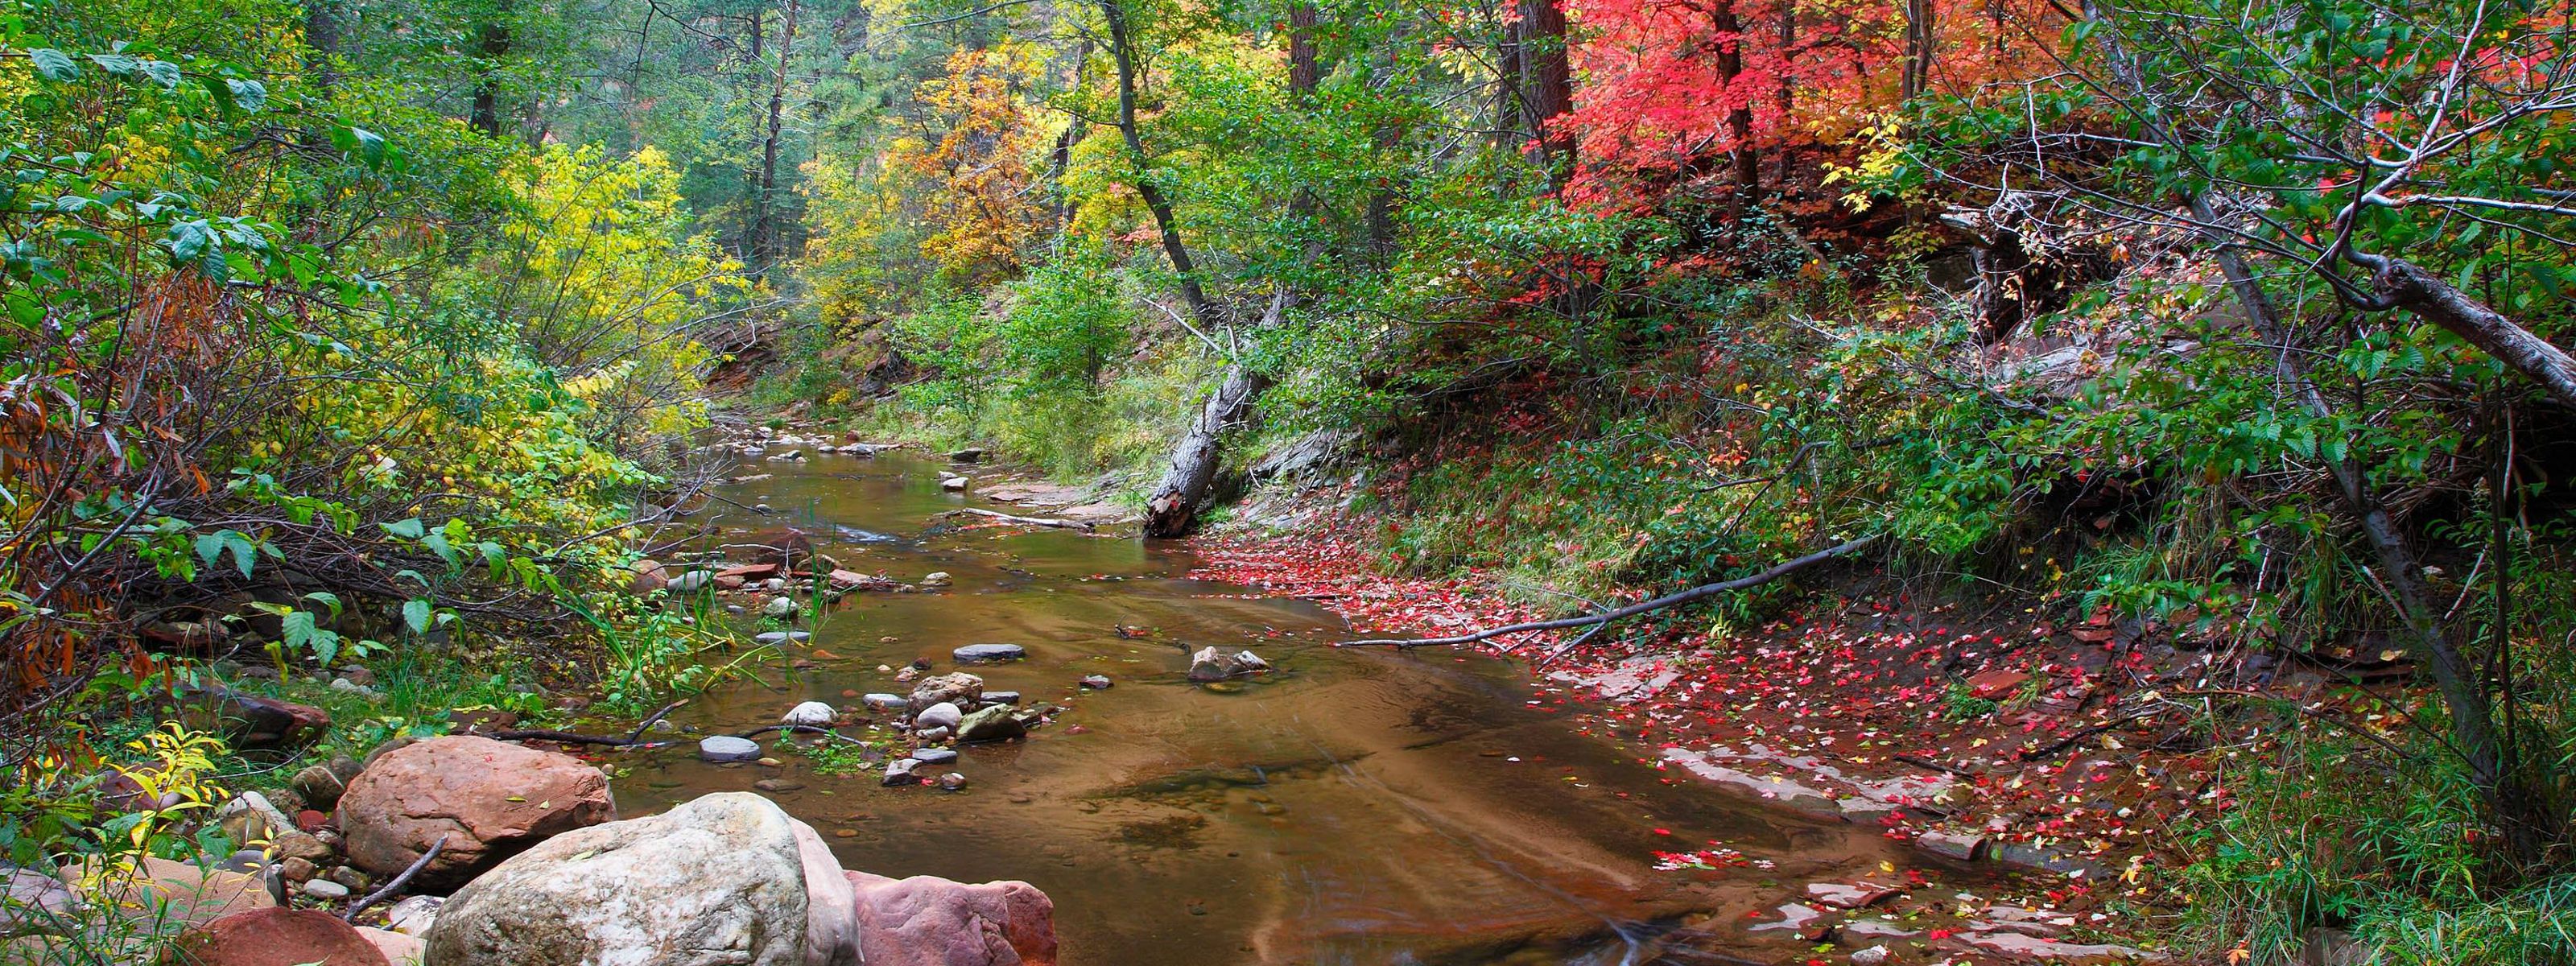 creak flowing with colorful fall leaves